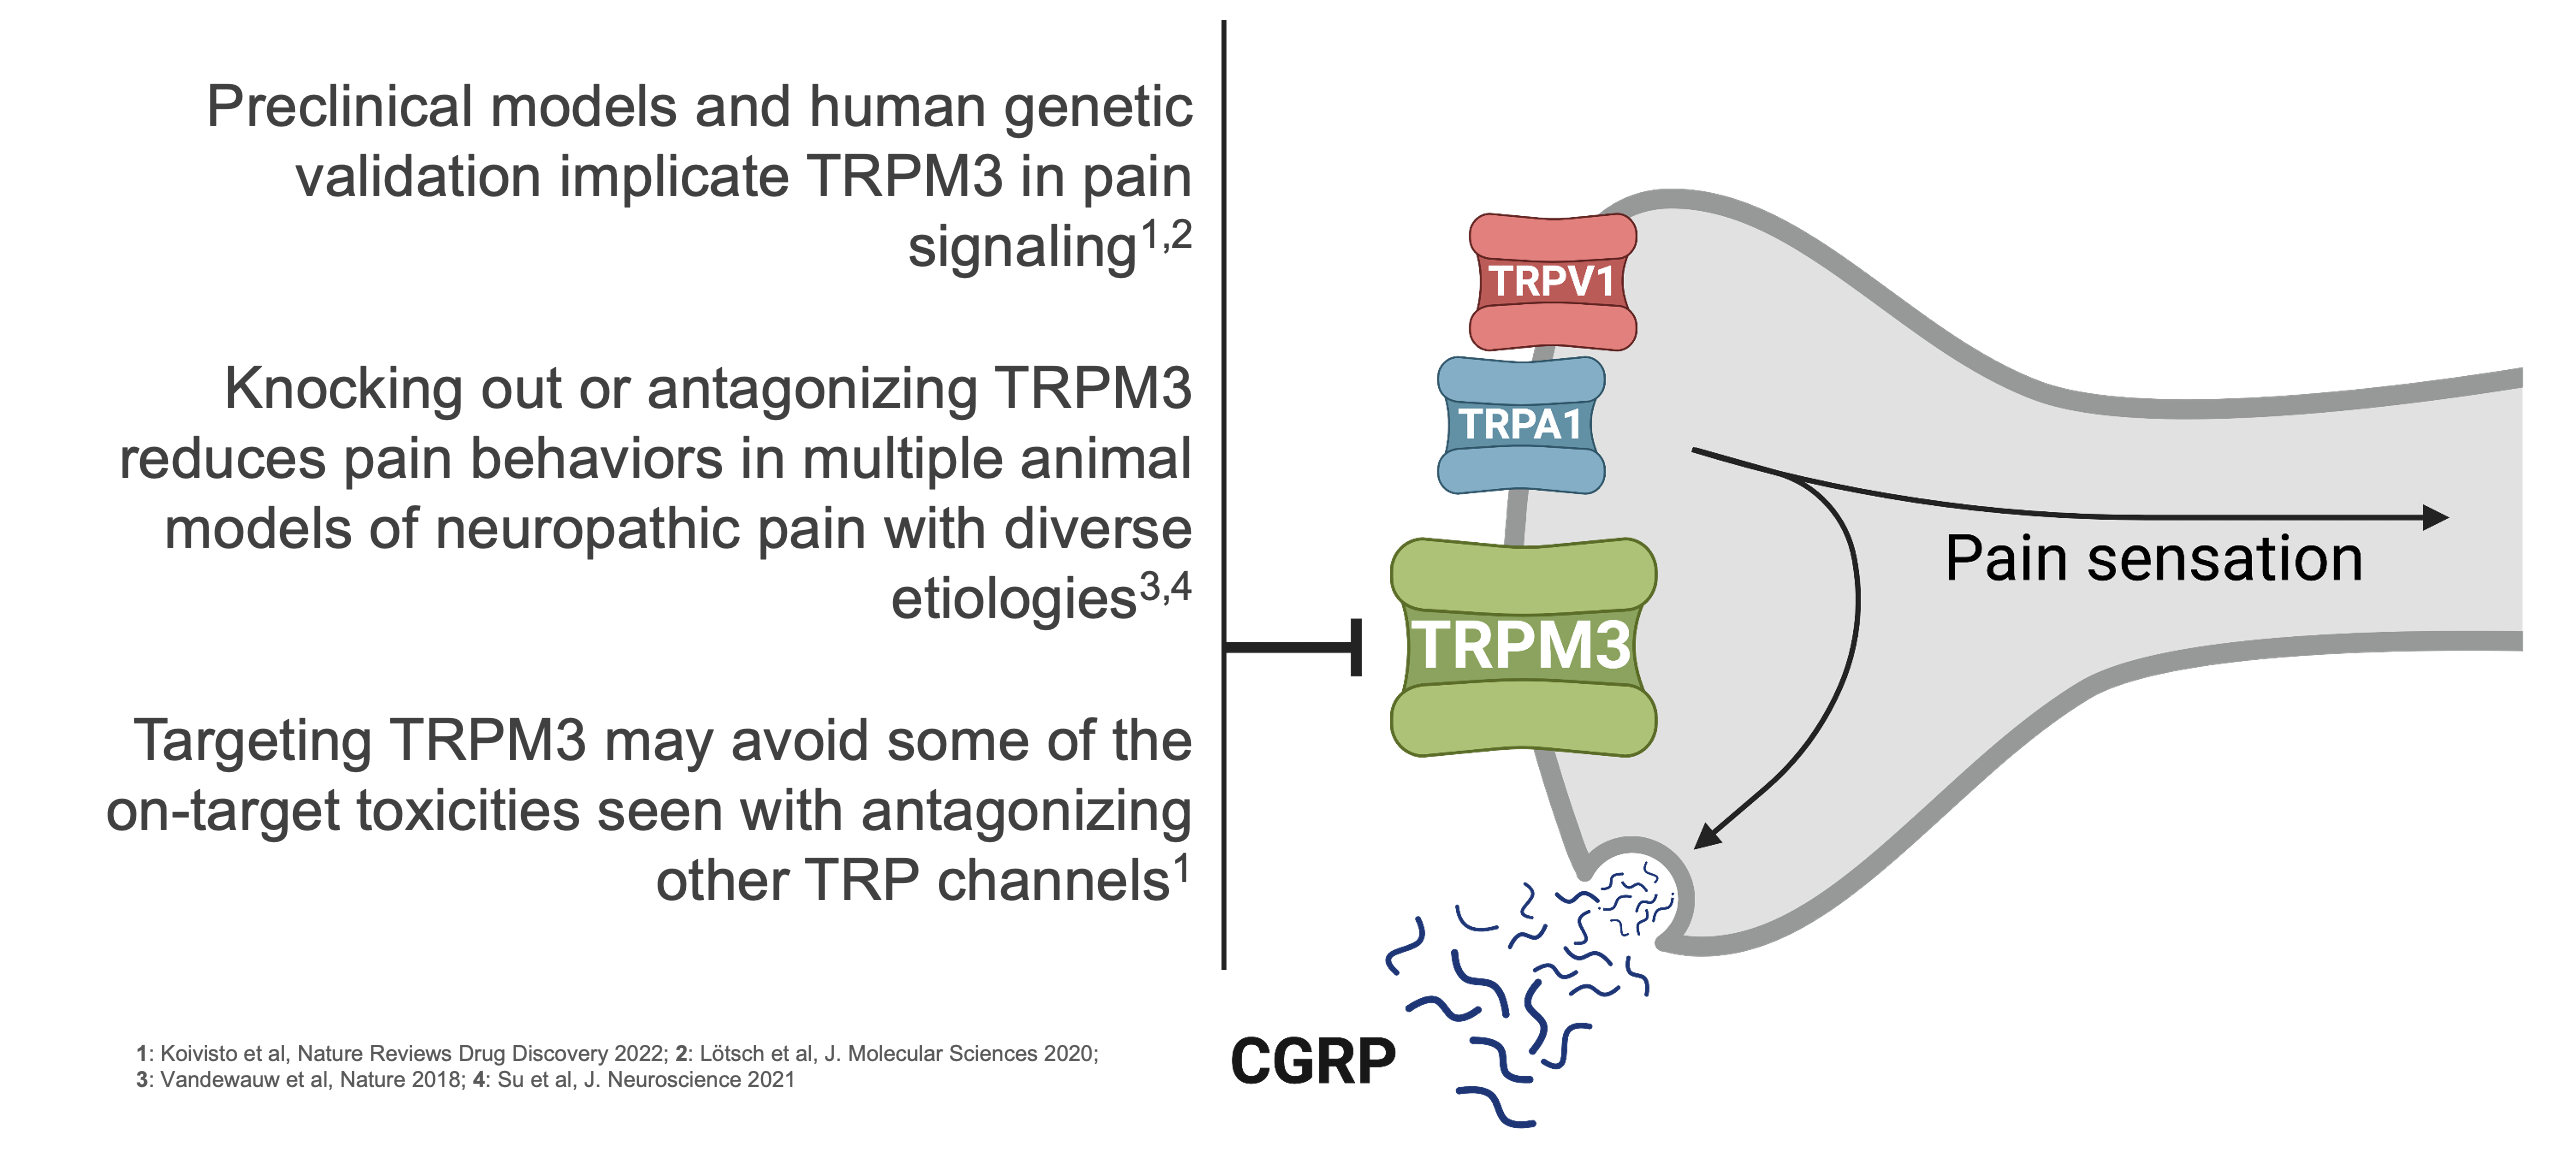 Biohaven TRPM3 is a novel druggable target in the TRP channel family